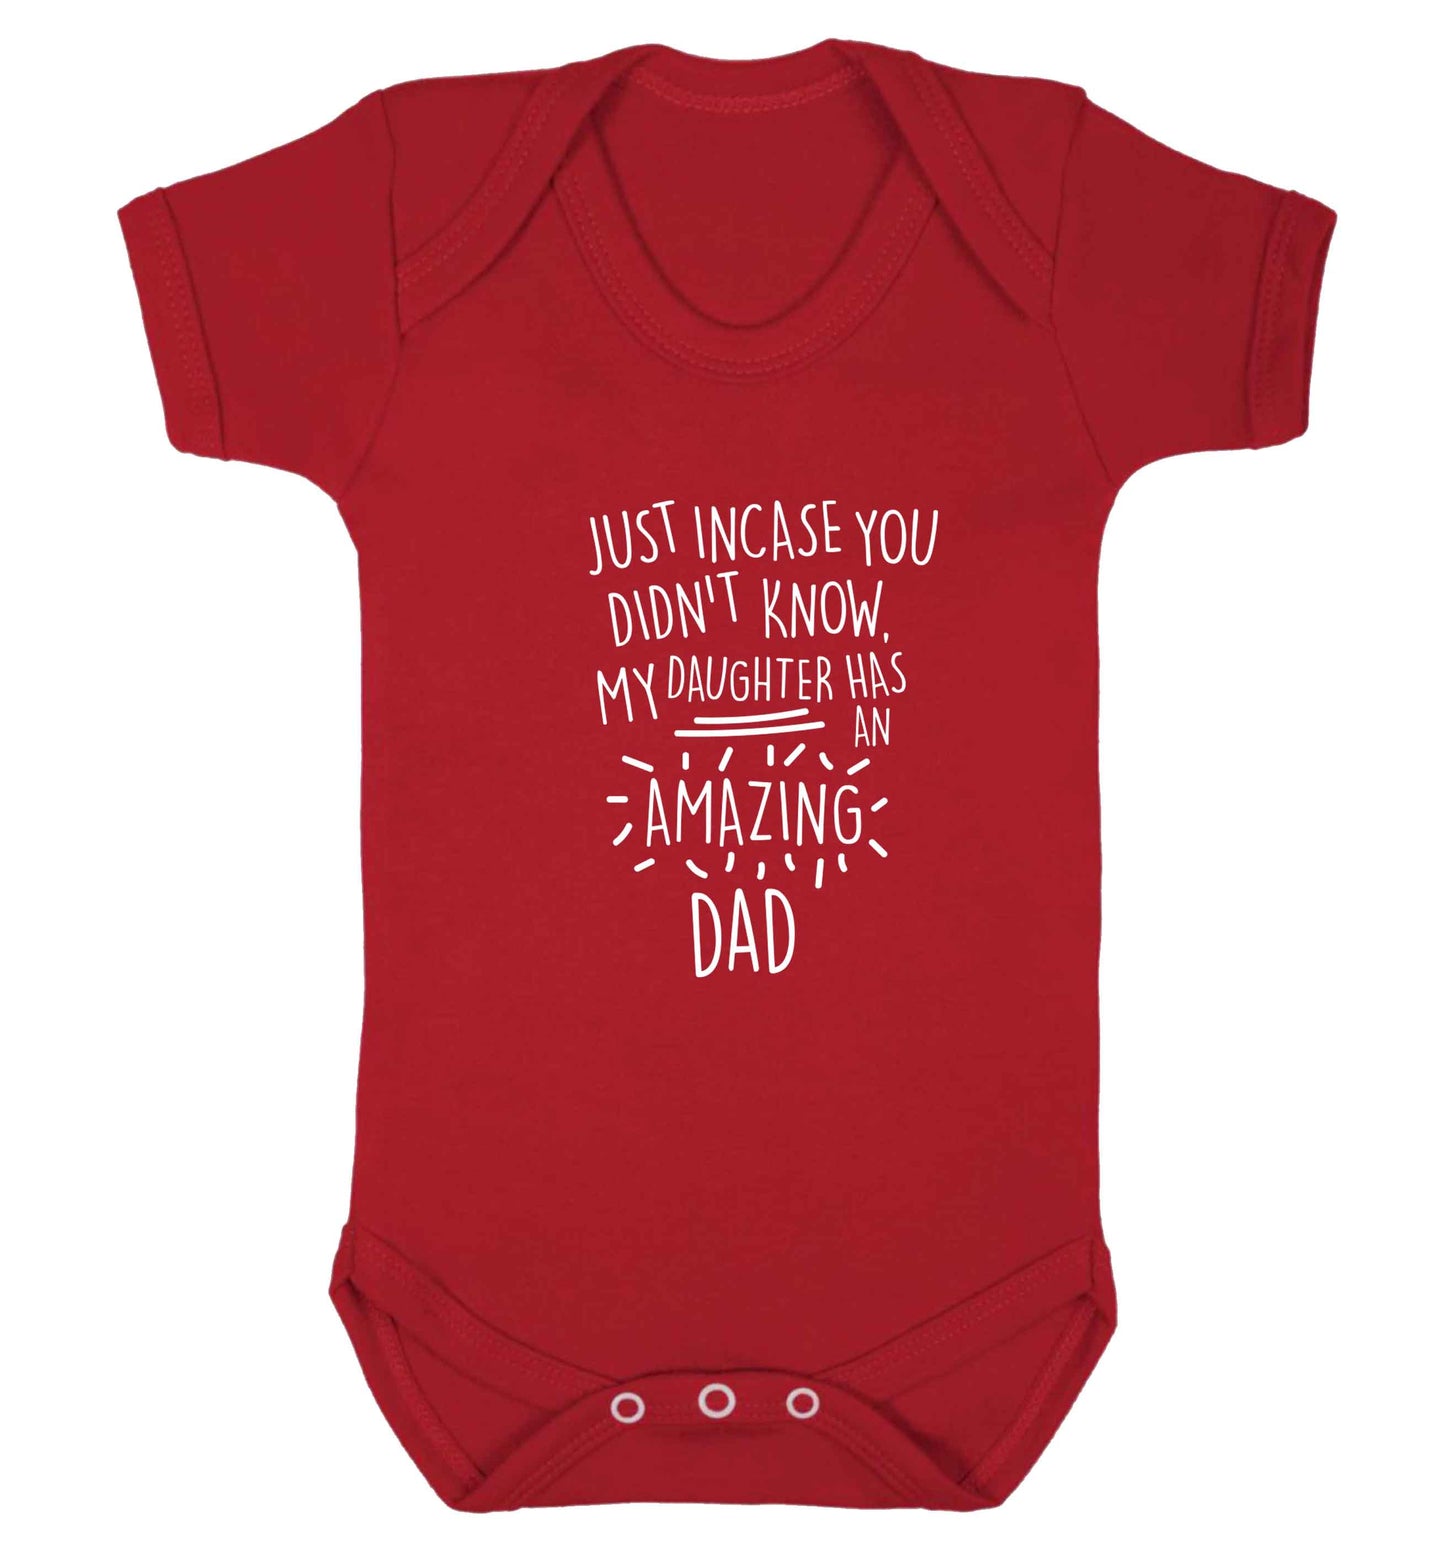 Just incase you didn't know my daughter has an amazing dad baby vest red 18-24 months